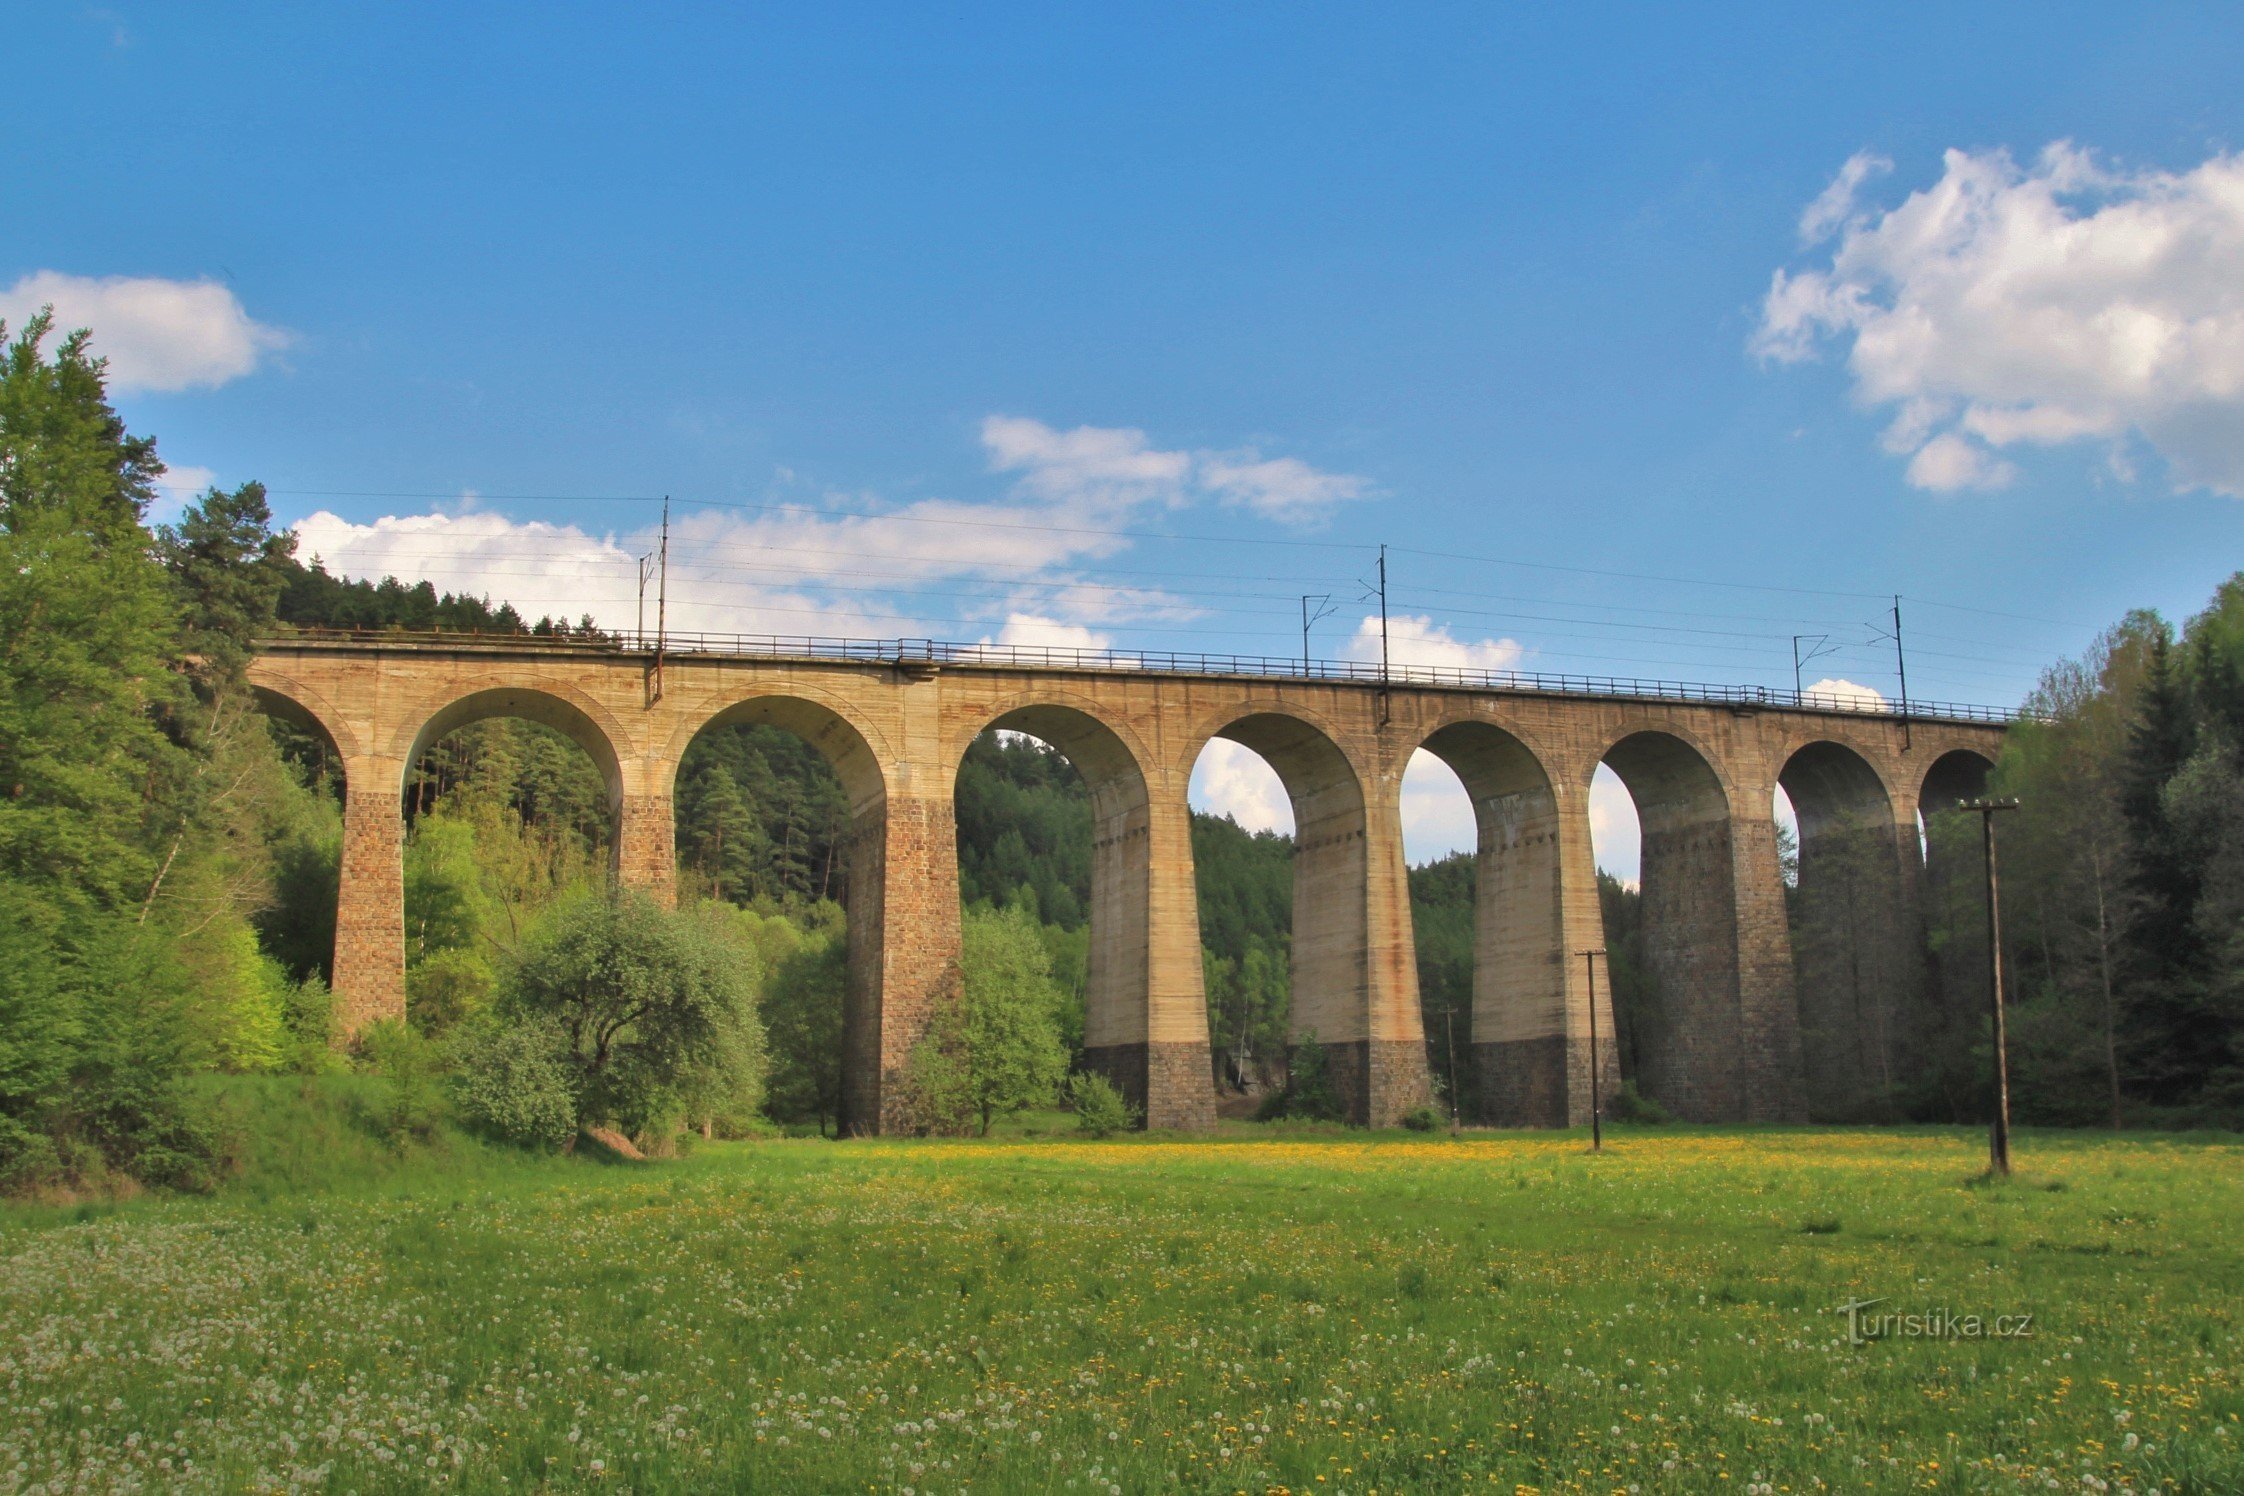 A large viaduct crossing the wide valley of the Libochovka river